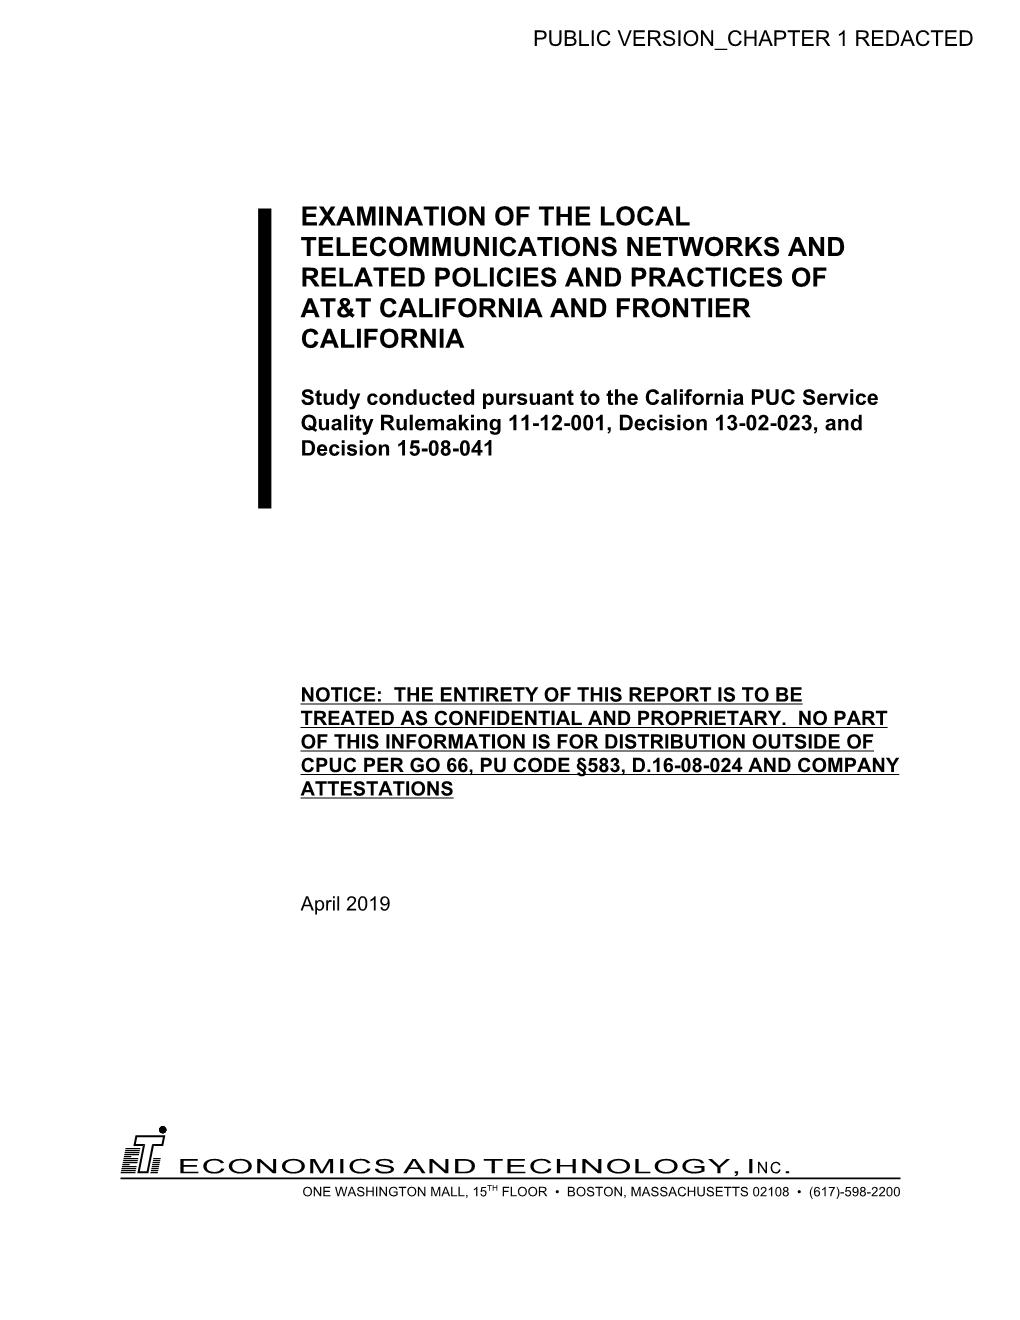 Examination of the Local Telecommunications Networks and Related Policies and Practices of At&T California and Frontier California